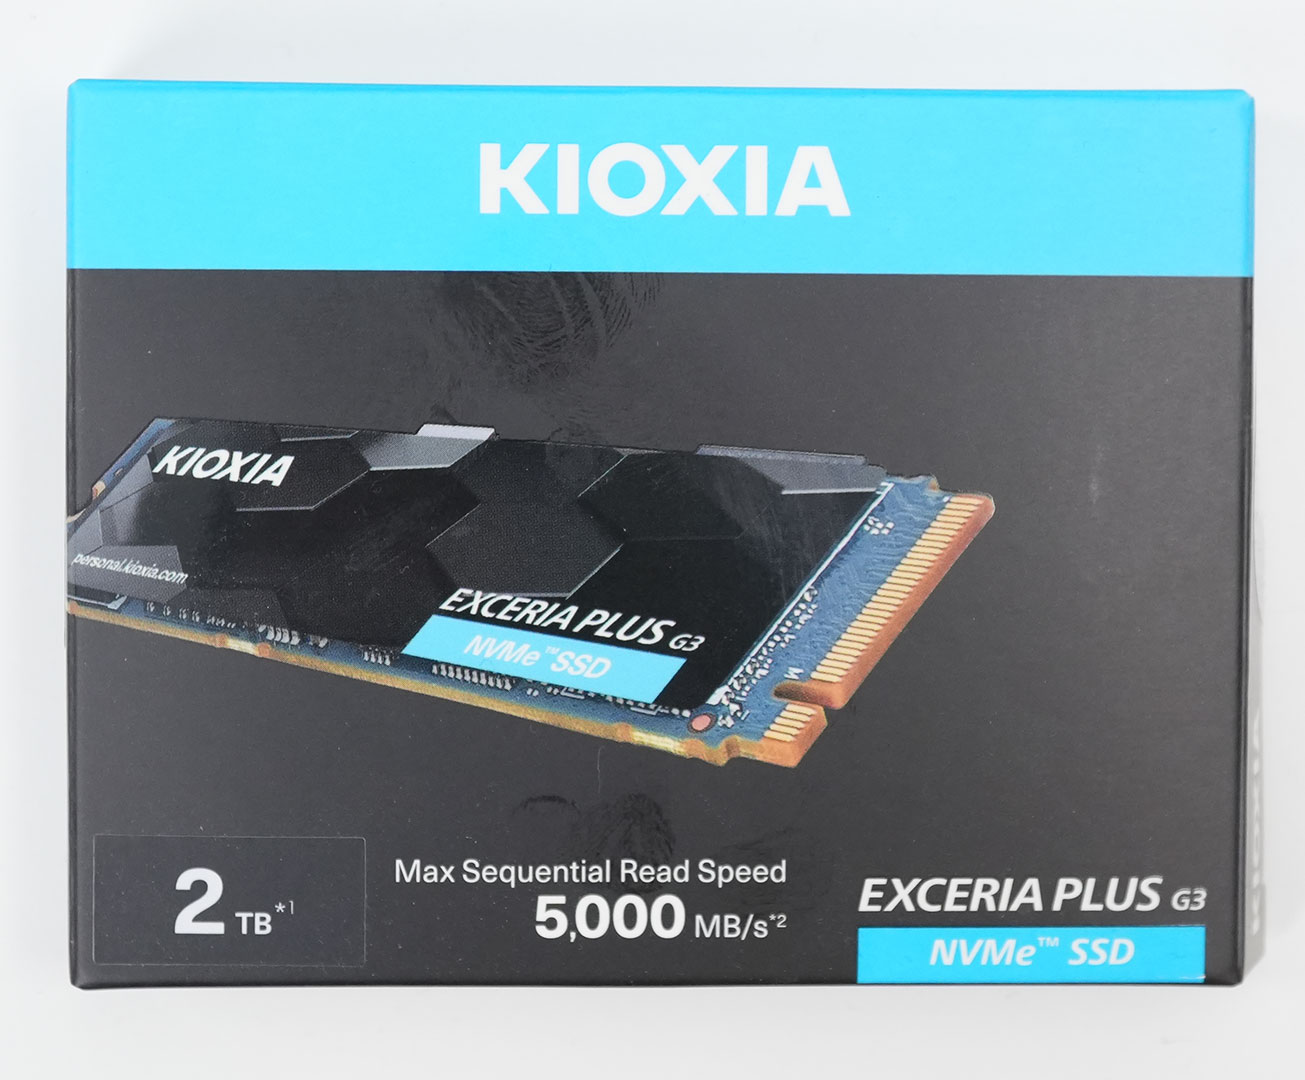 Kioxia Exceria Plus G3 2 TB Review - Pictures & Components 